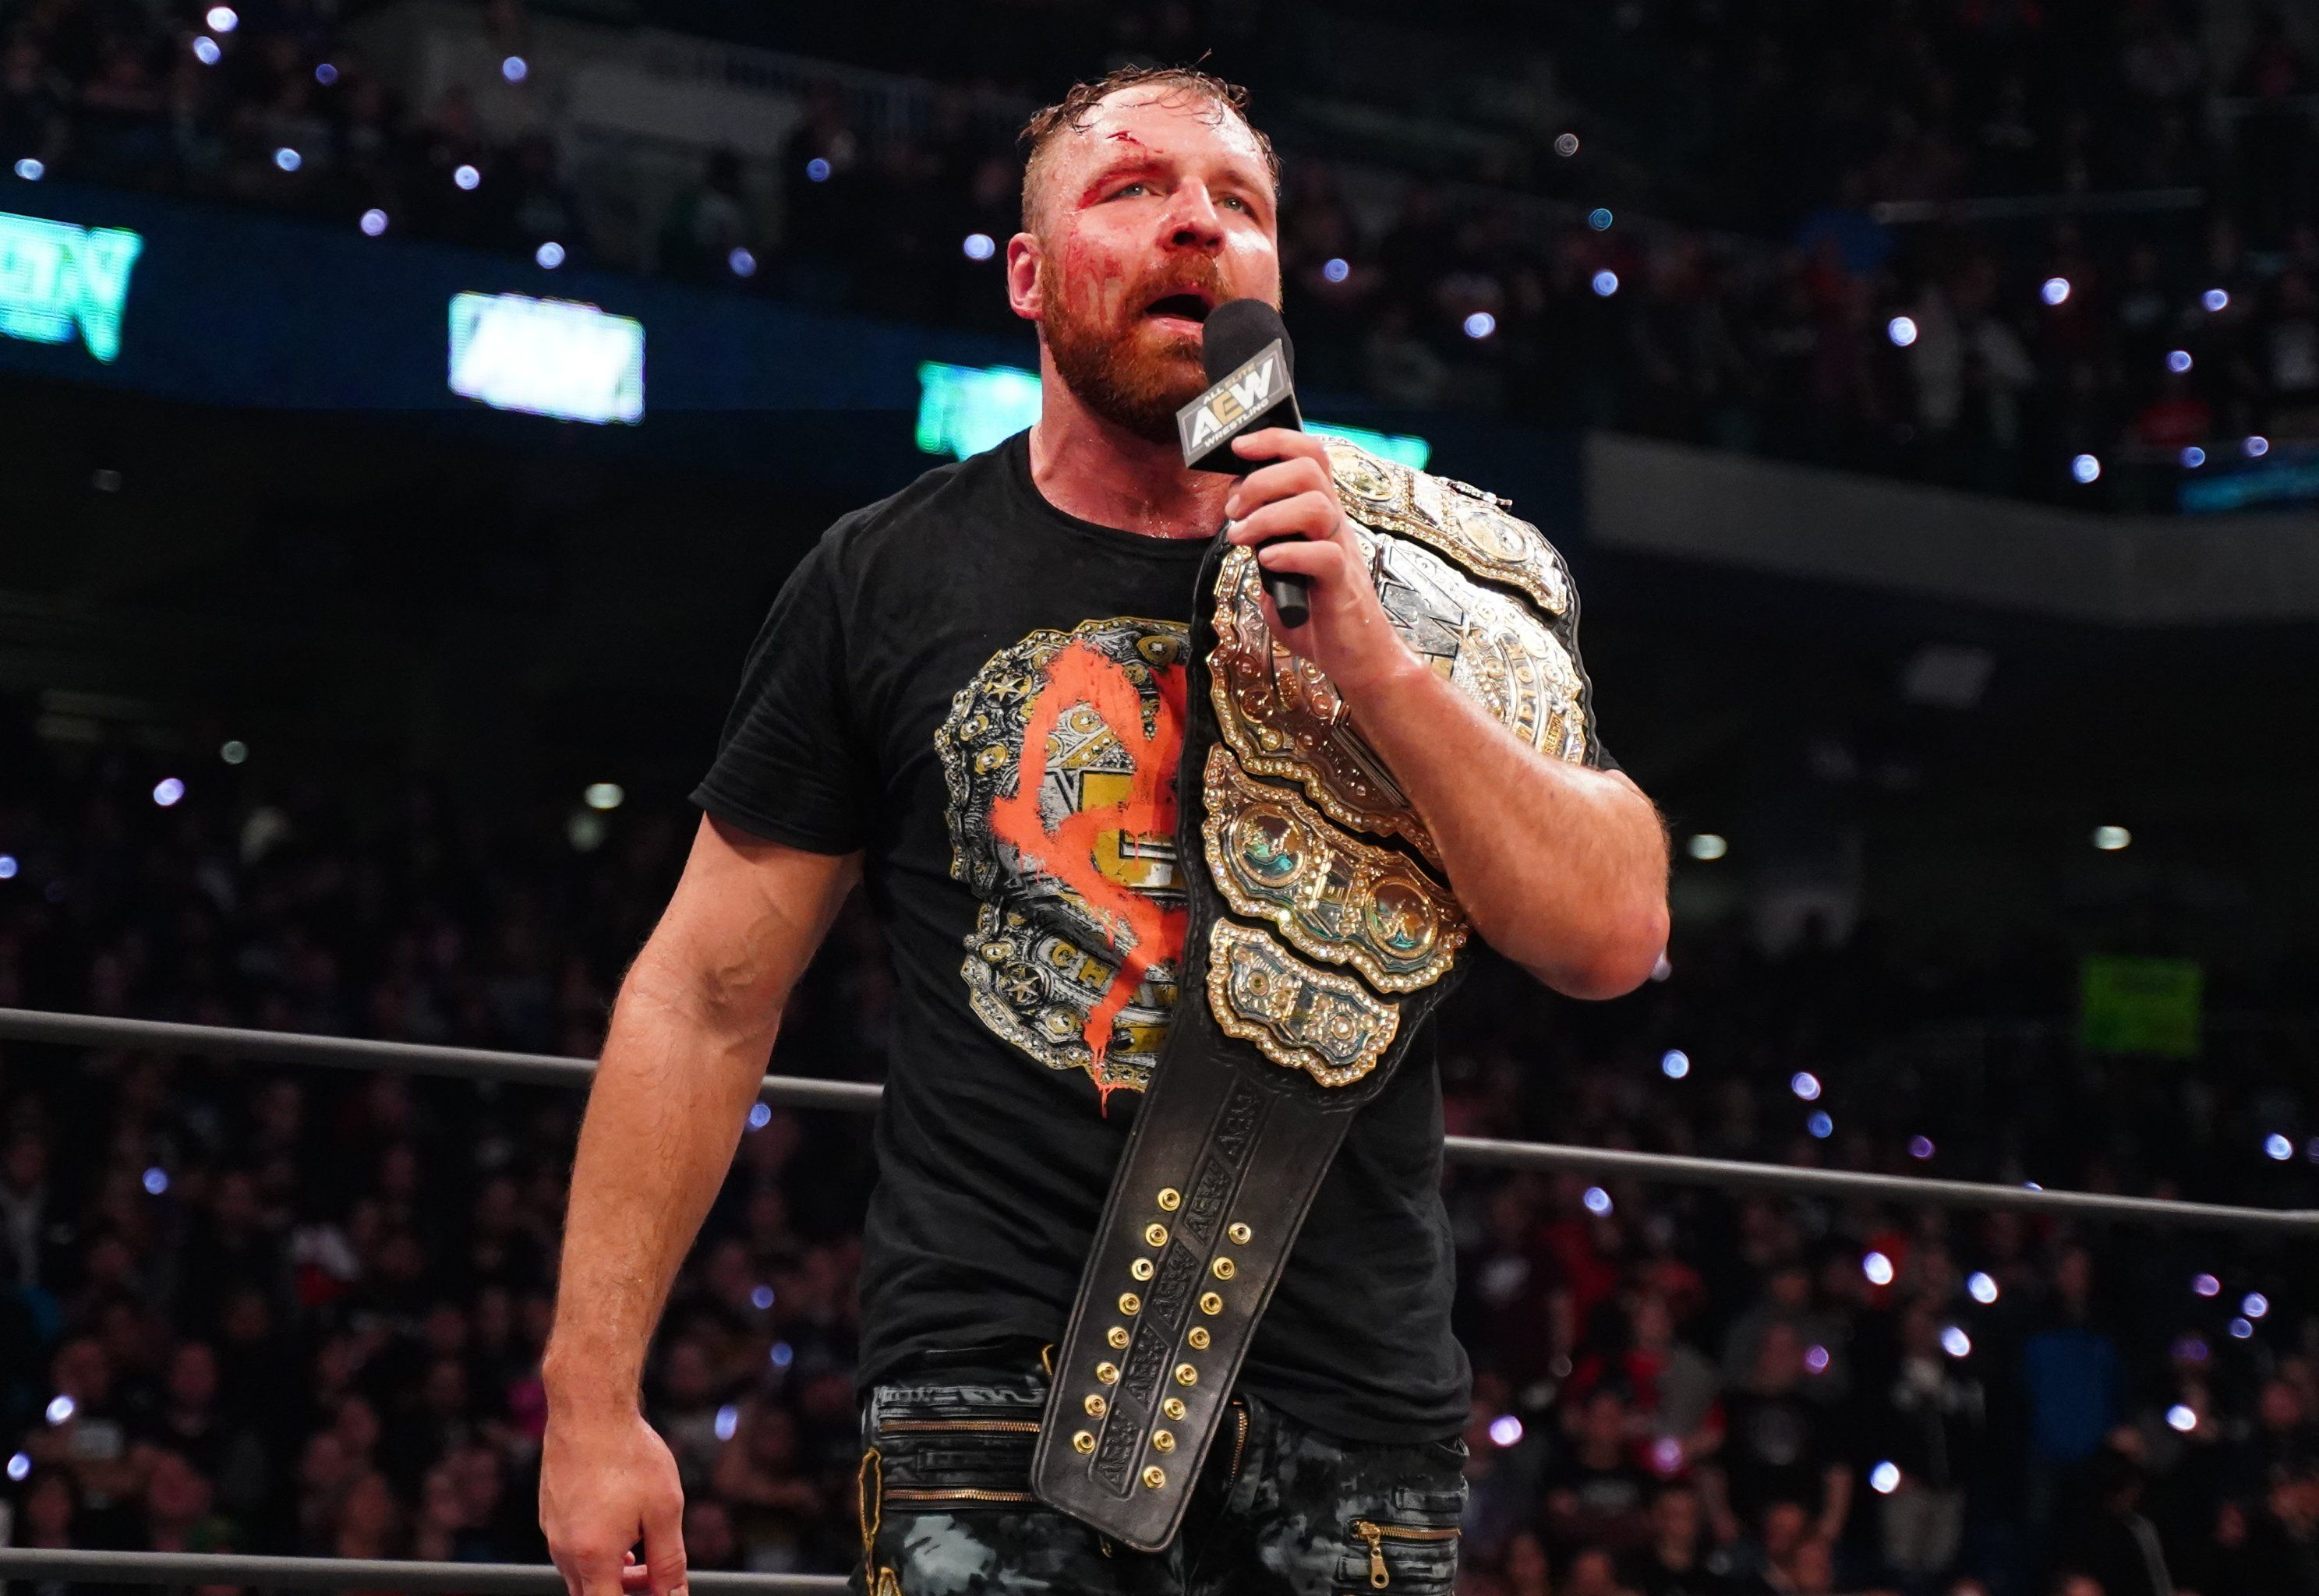 What's Next for Jon Moxley, Cody and AEW on the Road to Double or Nothing 2020?. Bleacher Report. Latest News, Videos and Highlights